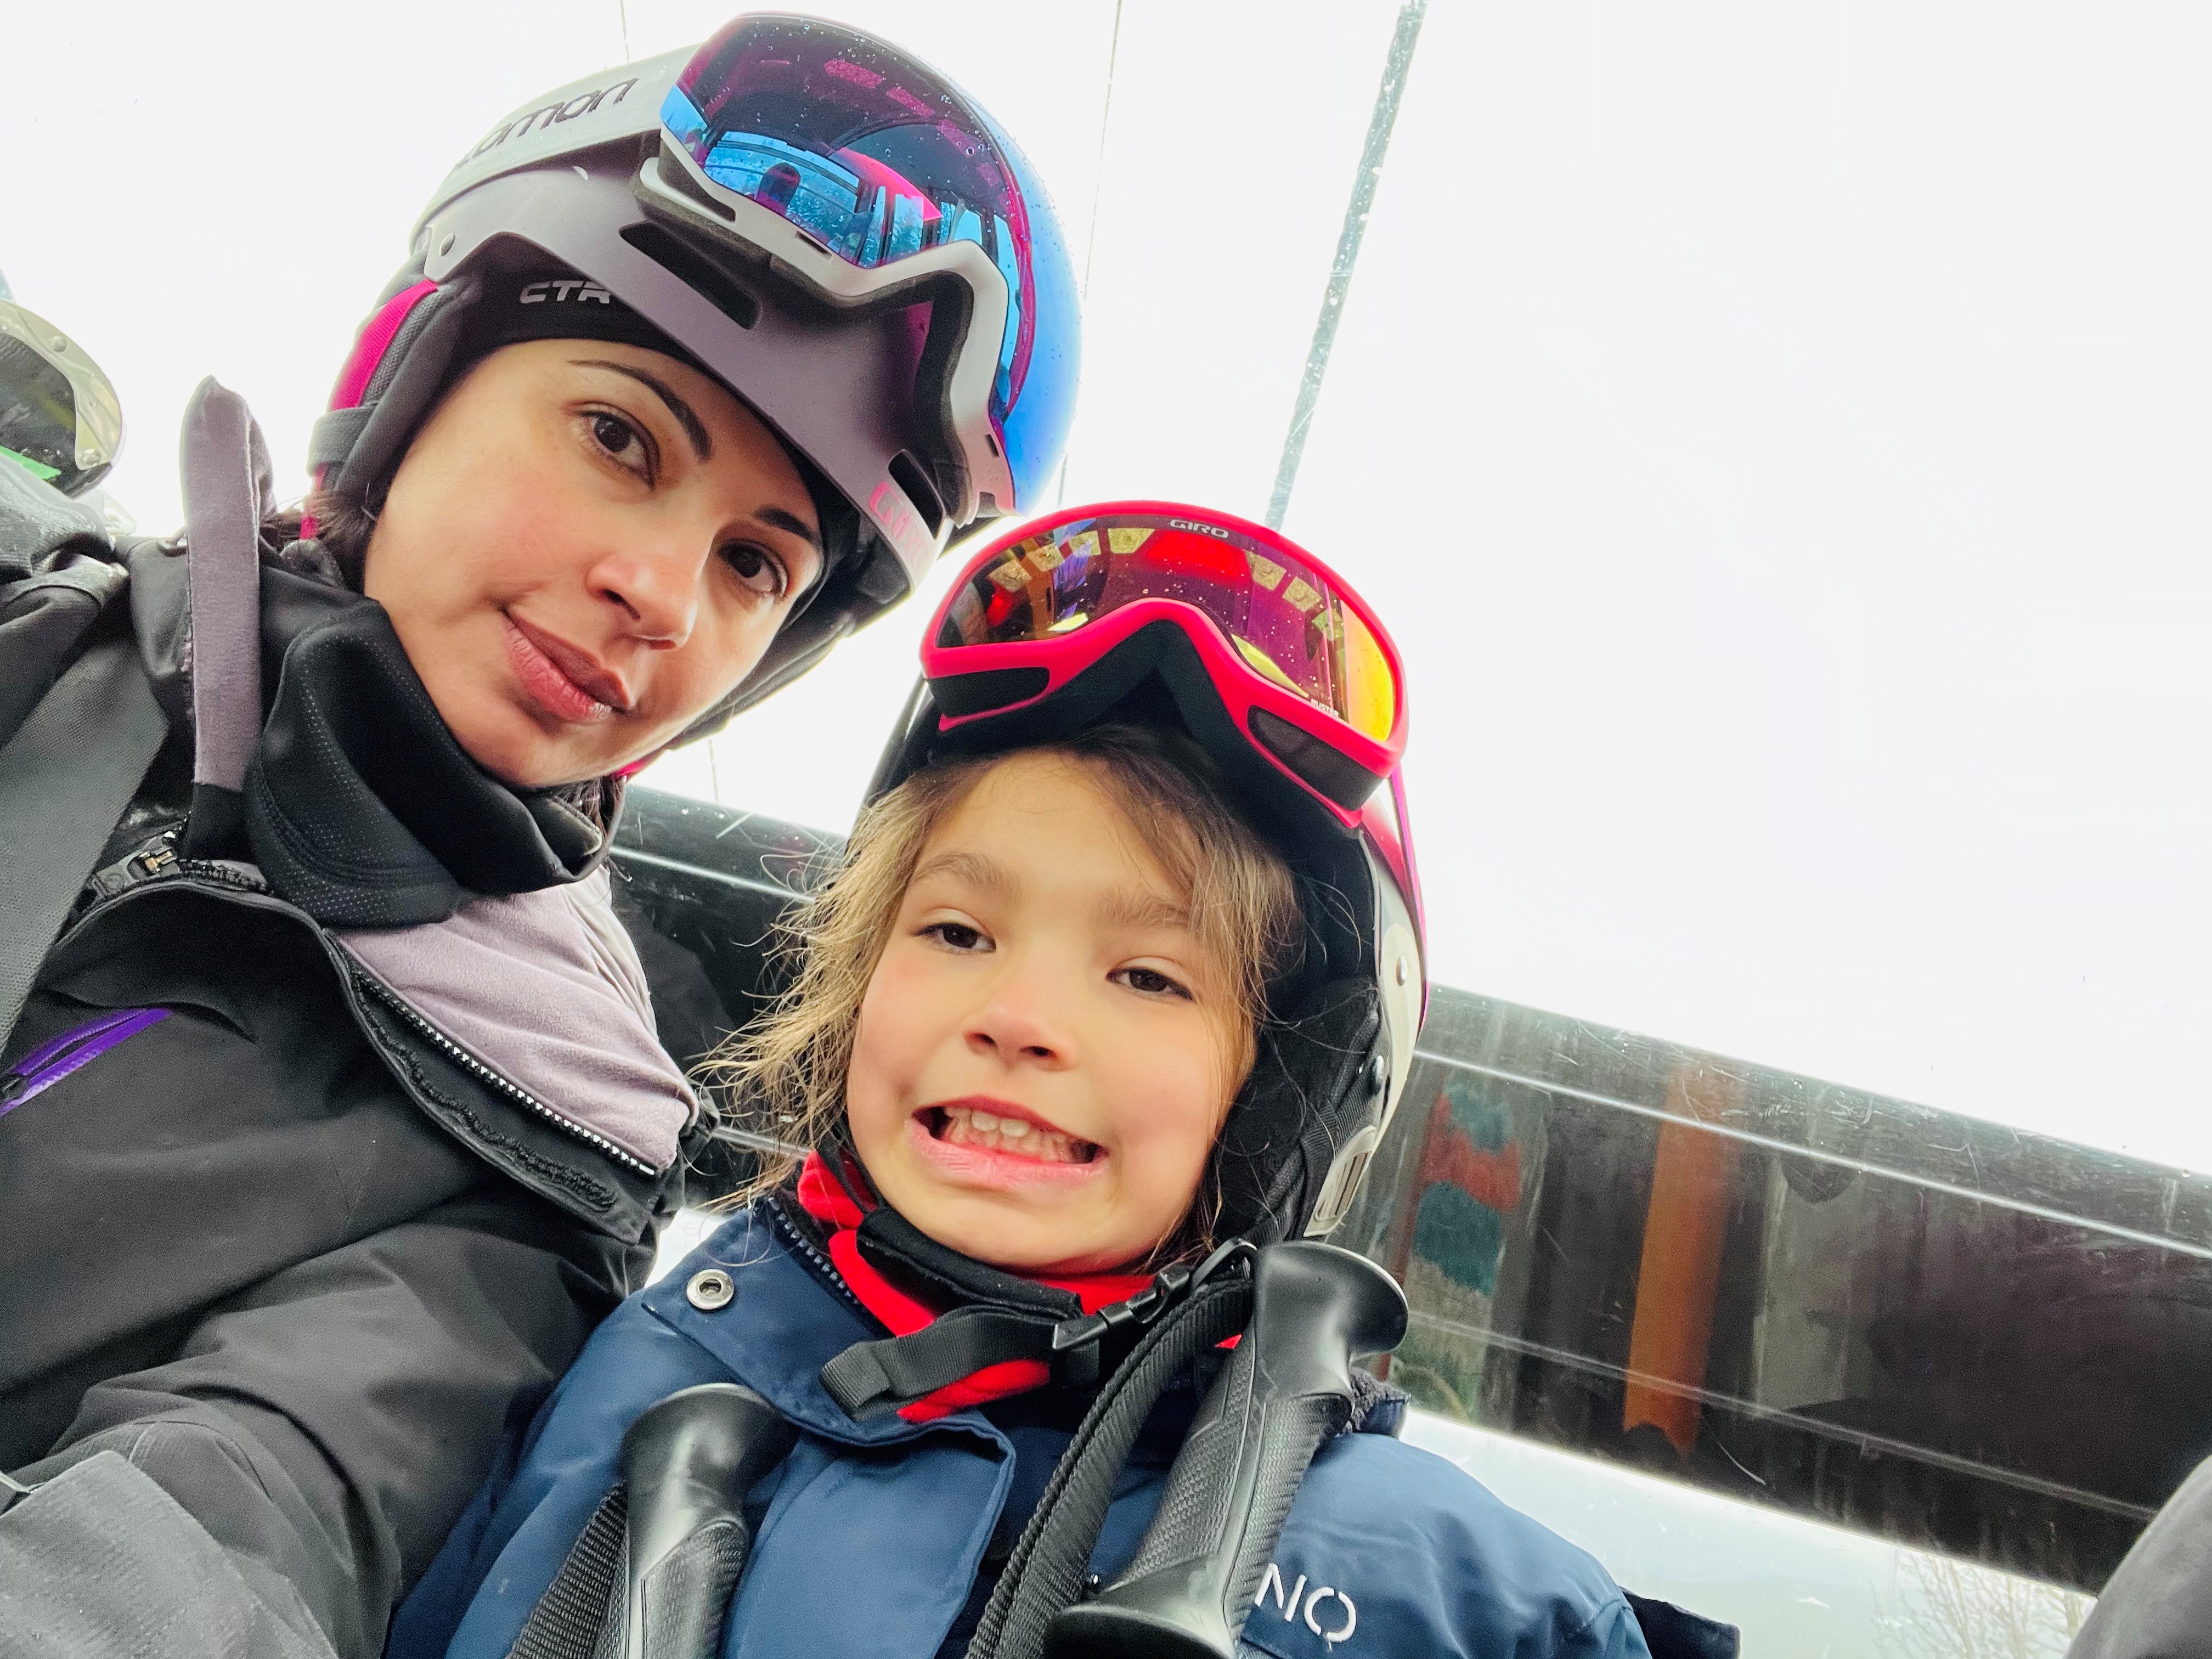 A selfie of a woman and child in skiing gear